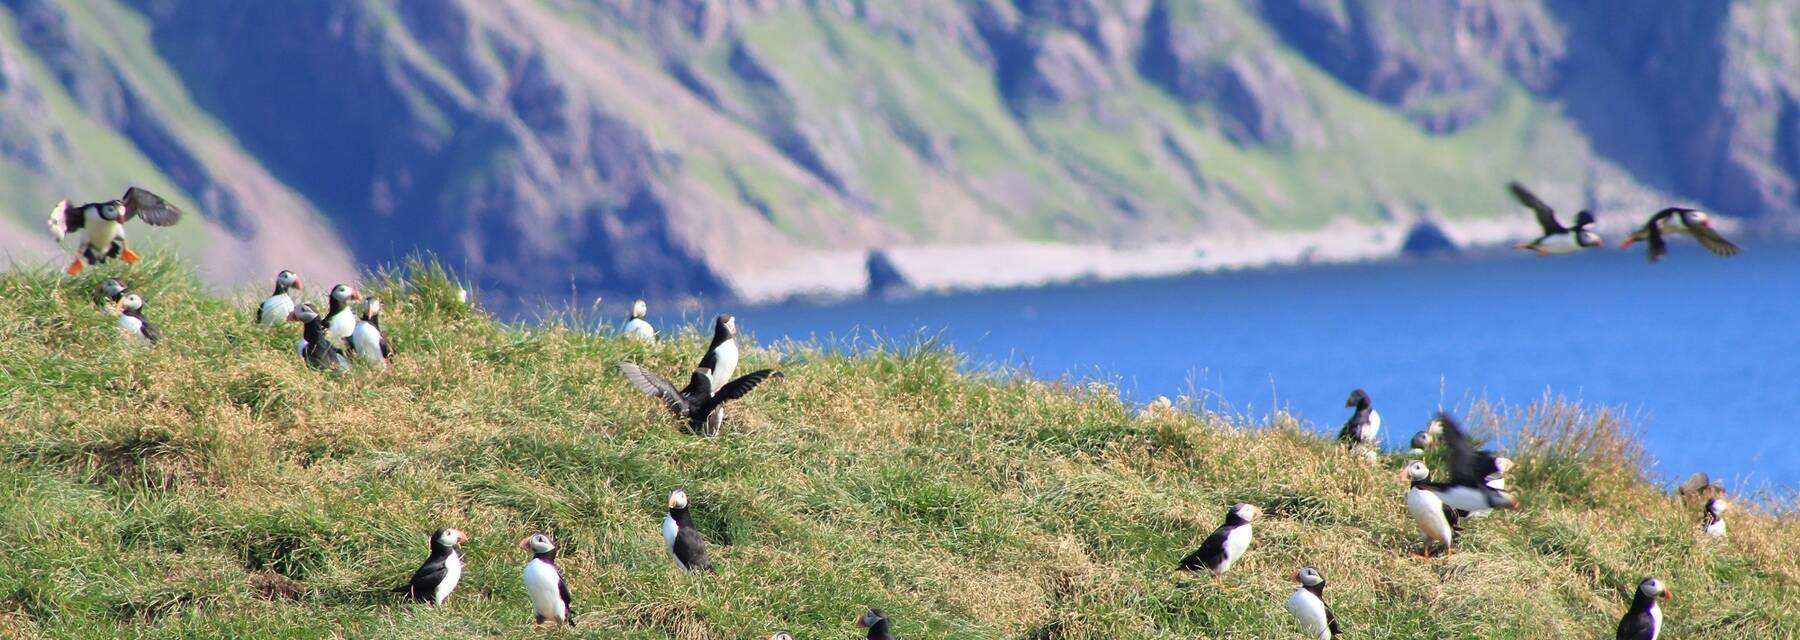 Many puffins gather on a grassy clifftop, with steep cliffs running into the blue sea in the background.